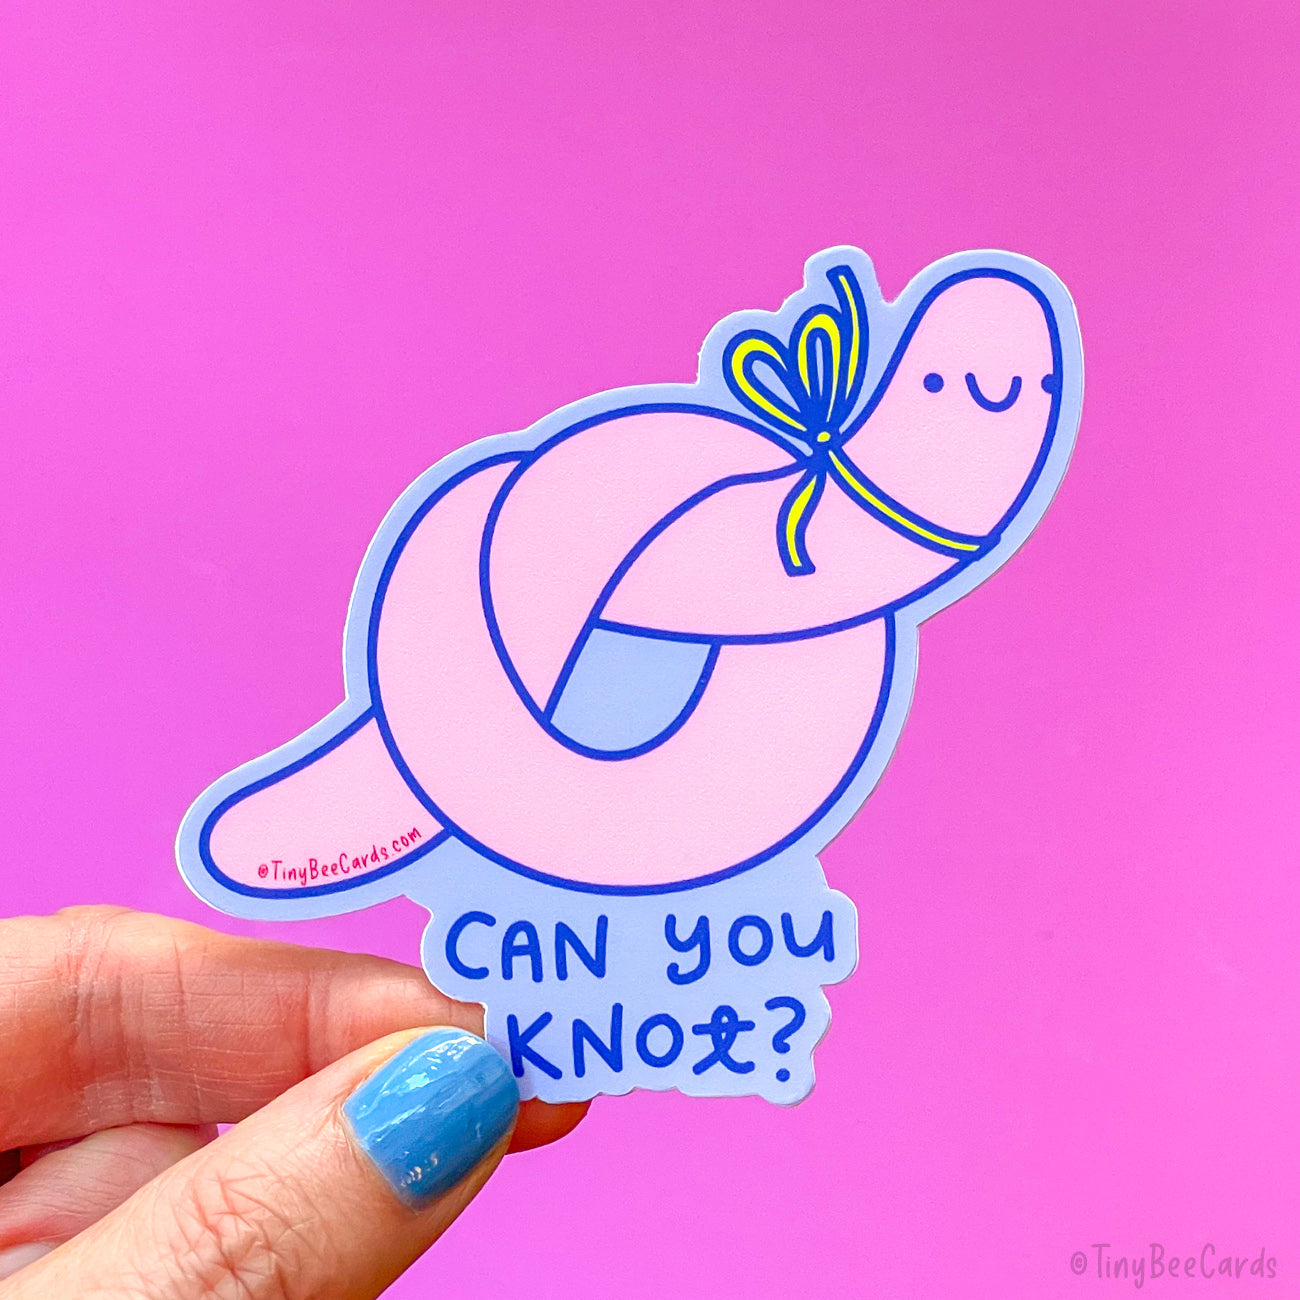 Earthworm Vinyl Sticker "Can You Knot?"